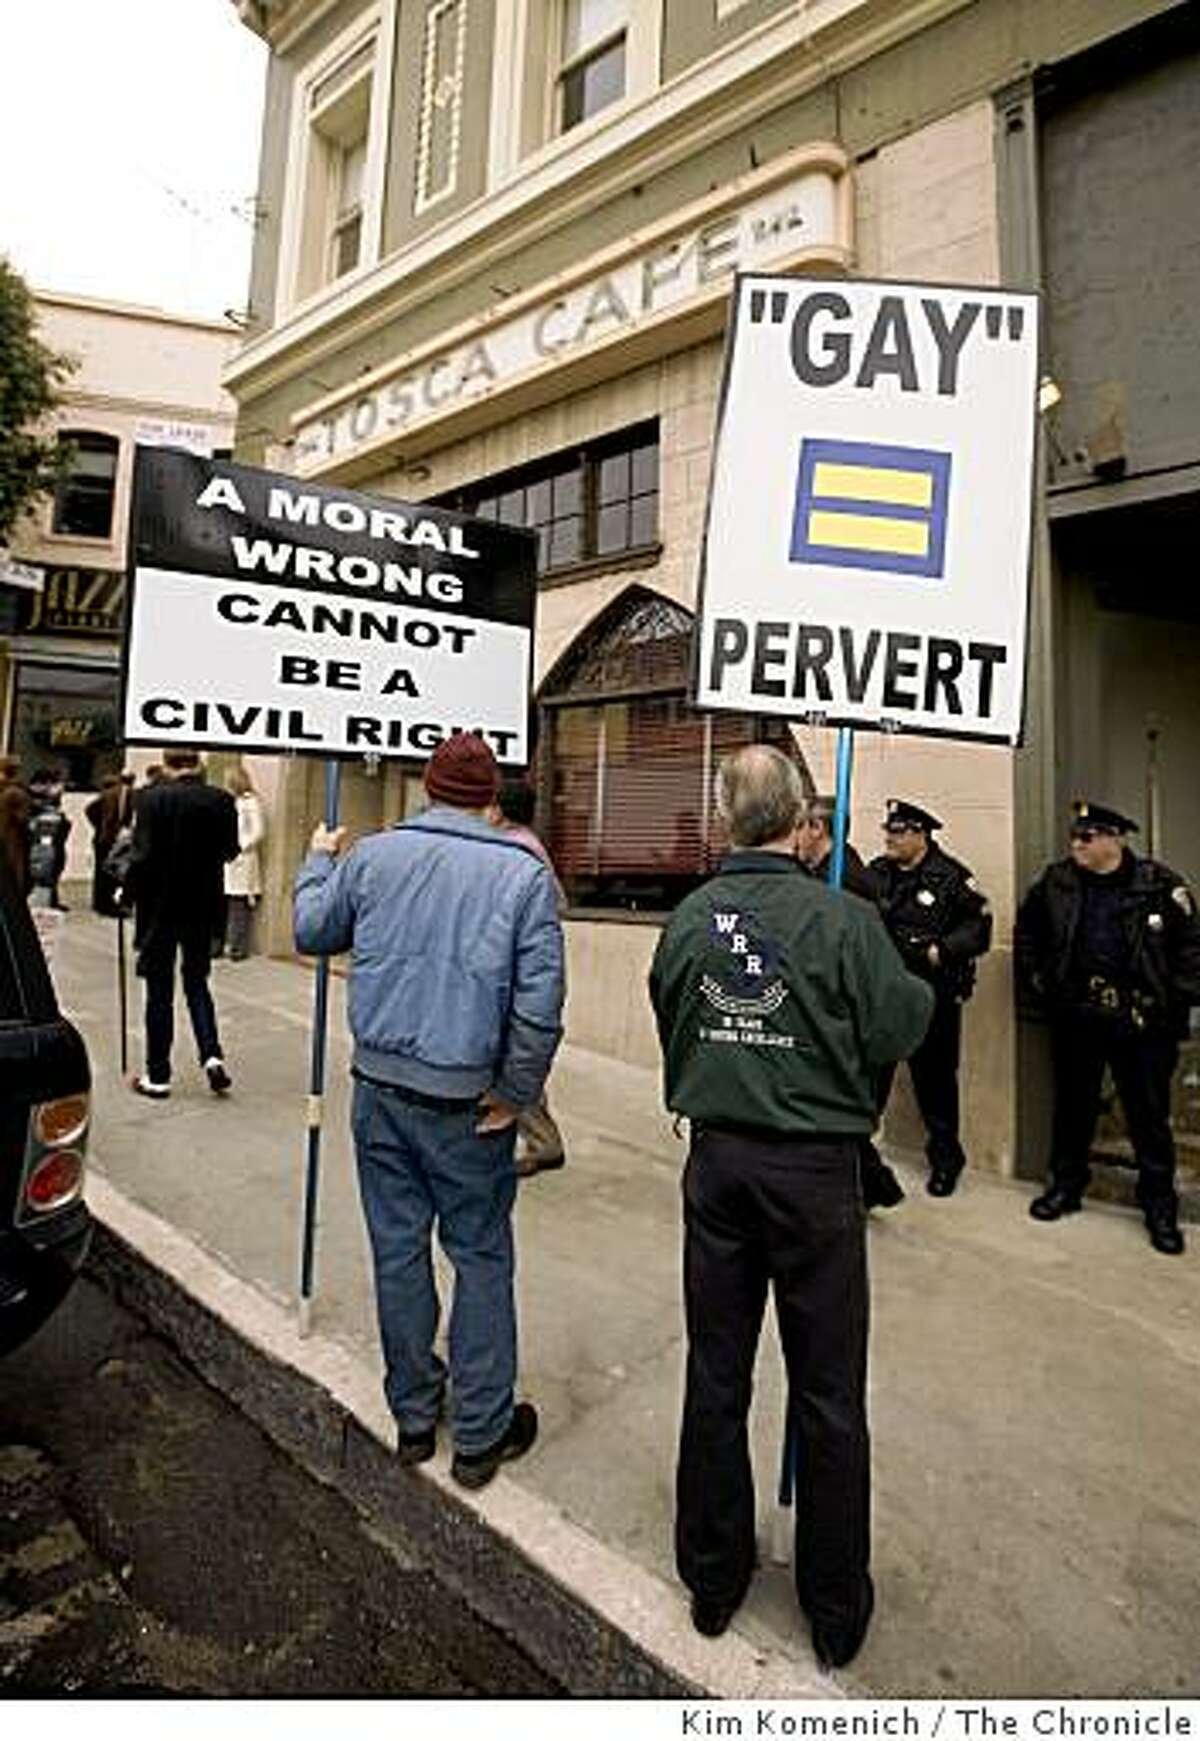 Two proesters hold signs outside the Tosca Cafe in San Francisco, Calif., on Tuesday, Mar. 3, 2009, where actor Sean Penn, who recently won an Academy Award for his portrayal of slain San Francisco Supervisor Harvey Milk, spoke at a press conference announcing the reintroduction of California Senate Bill 572. The bill, authored by State Senator Mark Leno of San Francisco, would designate May 22 as Harvey Milk Day